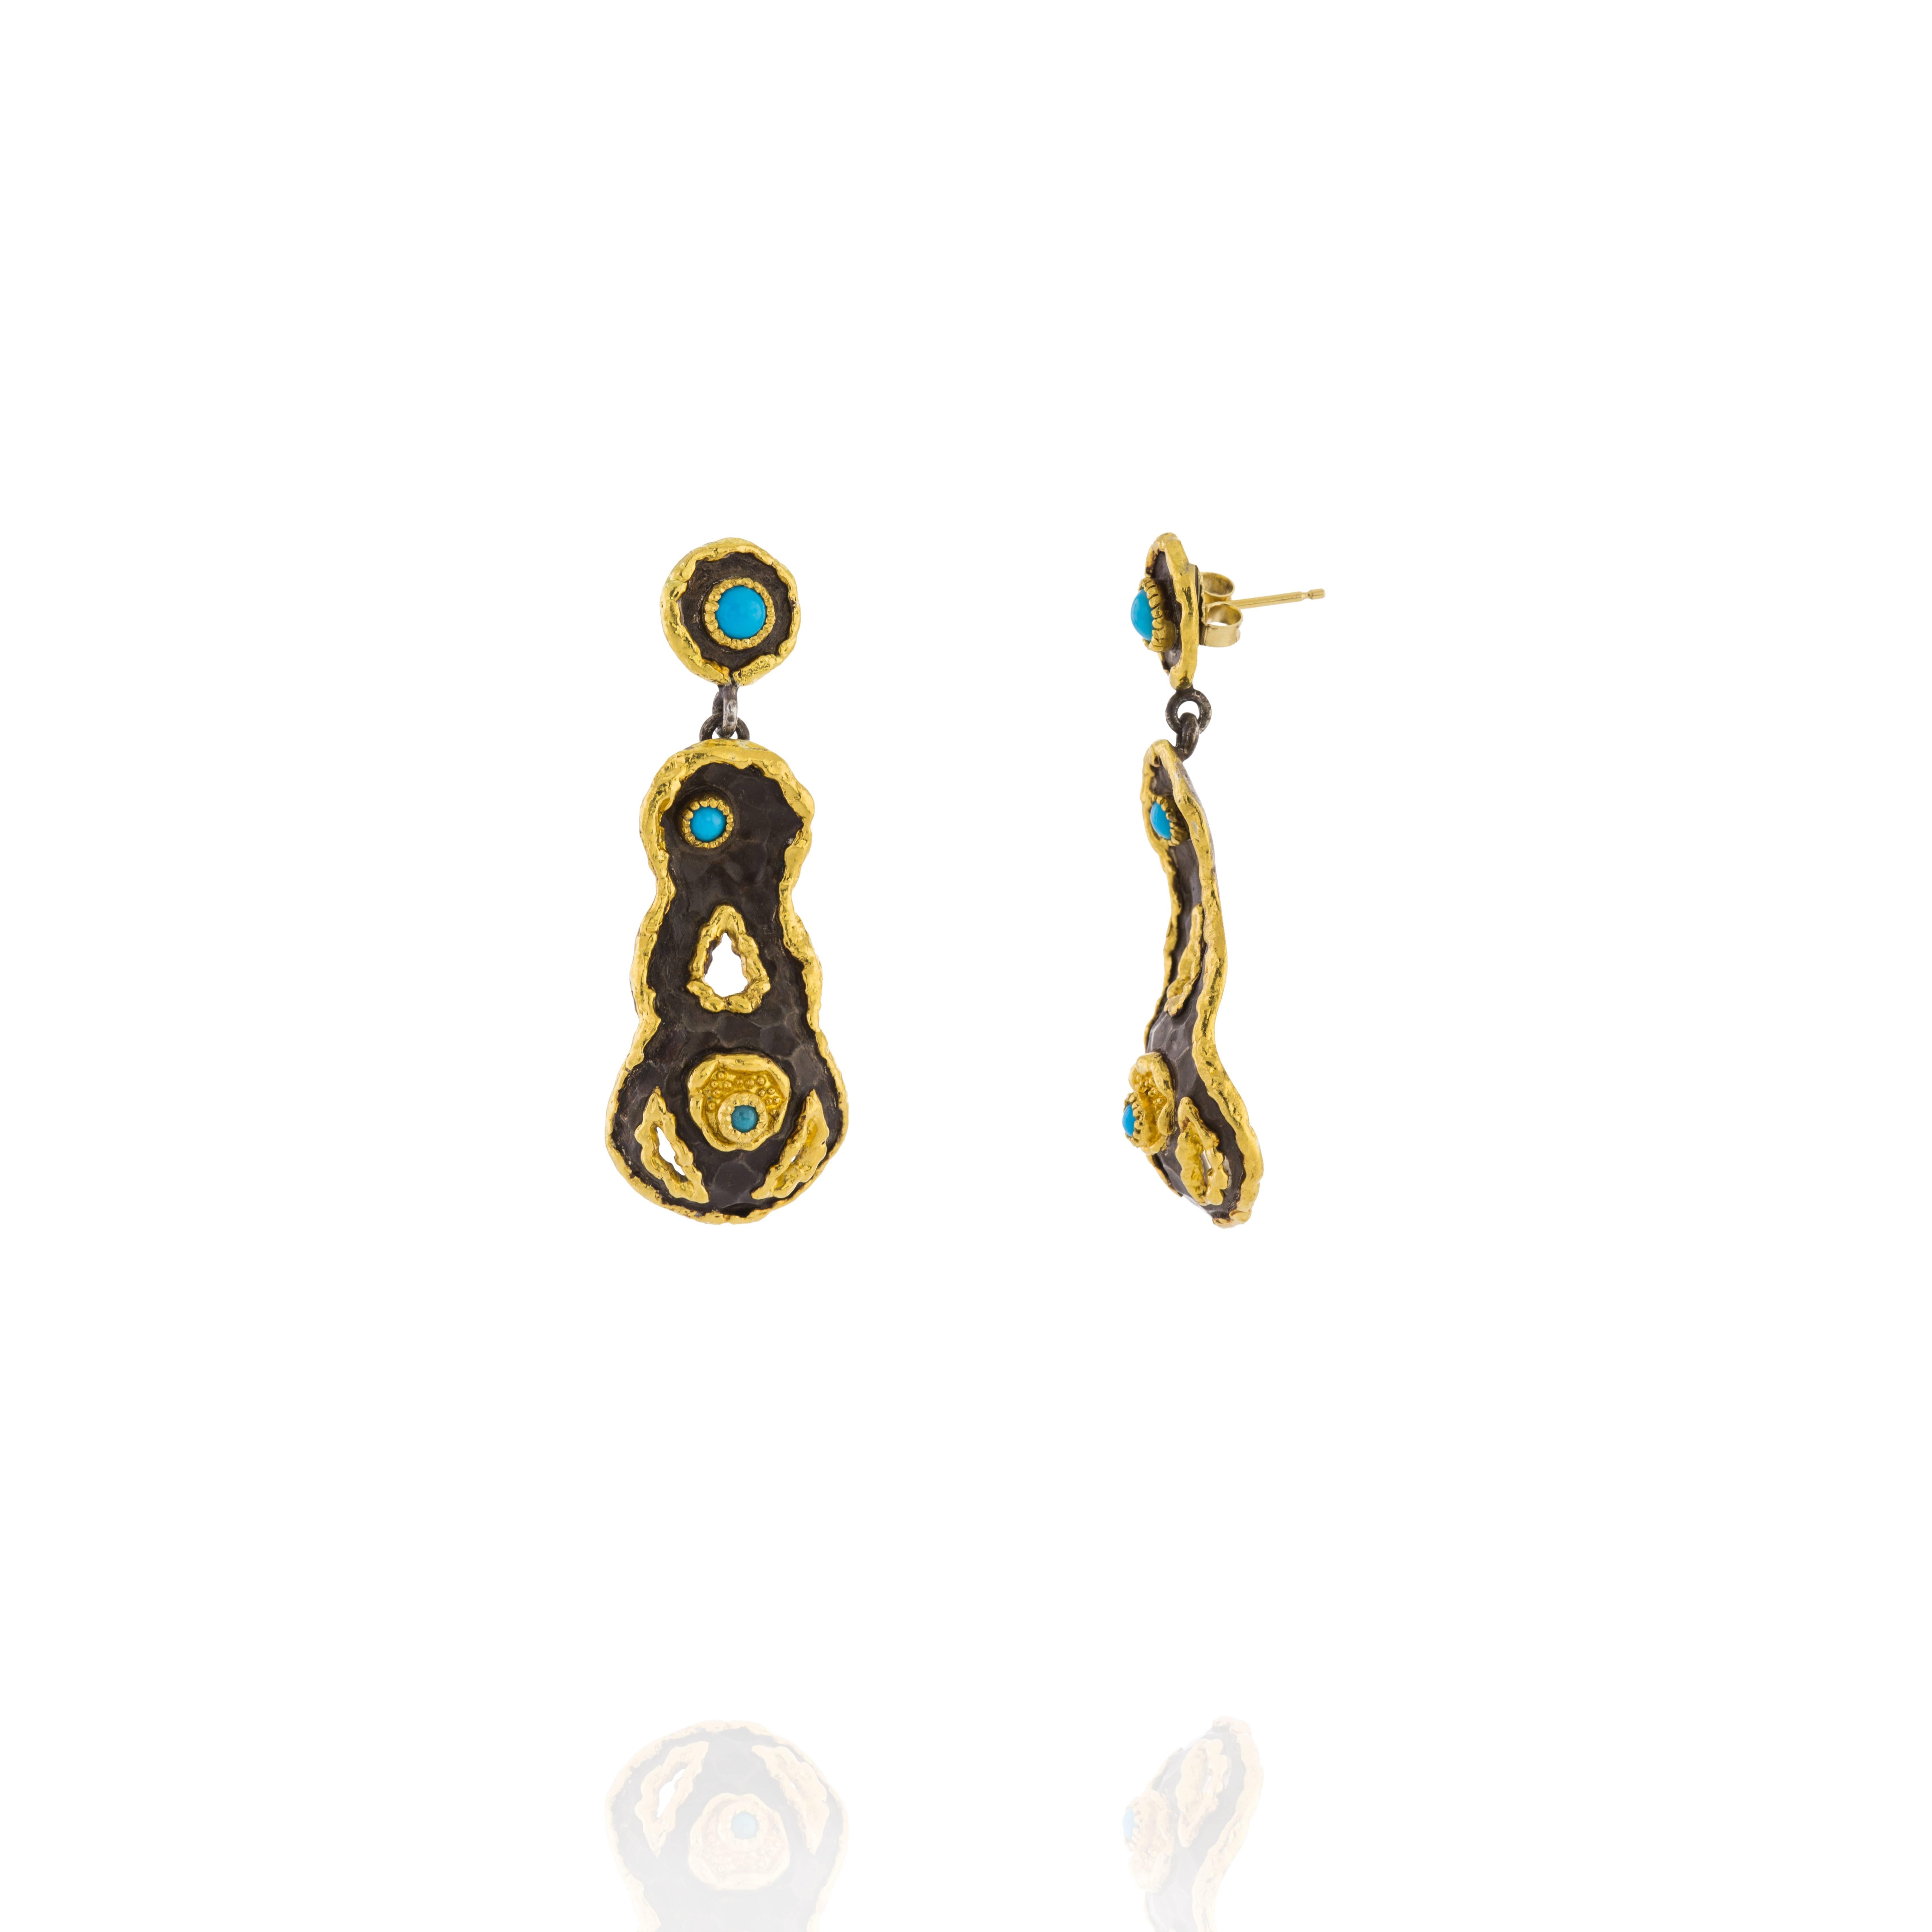 Earrings designed and made by Victor Velyan with his proprietary brown patina.  They contain 6 Turquoise stones.  The earrings are made with a Sterling Silver base and all accent work is done in 24K Gold. The brown patina is hand painted and bonded